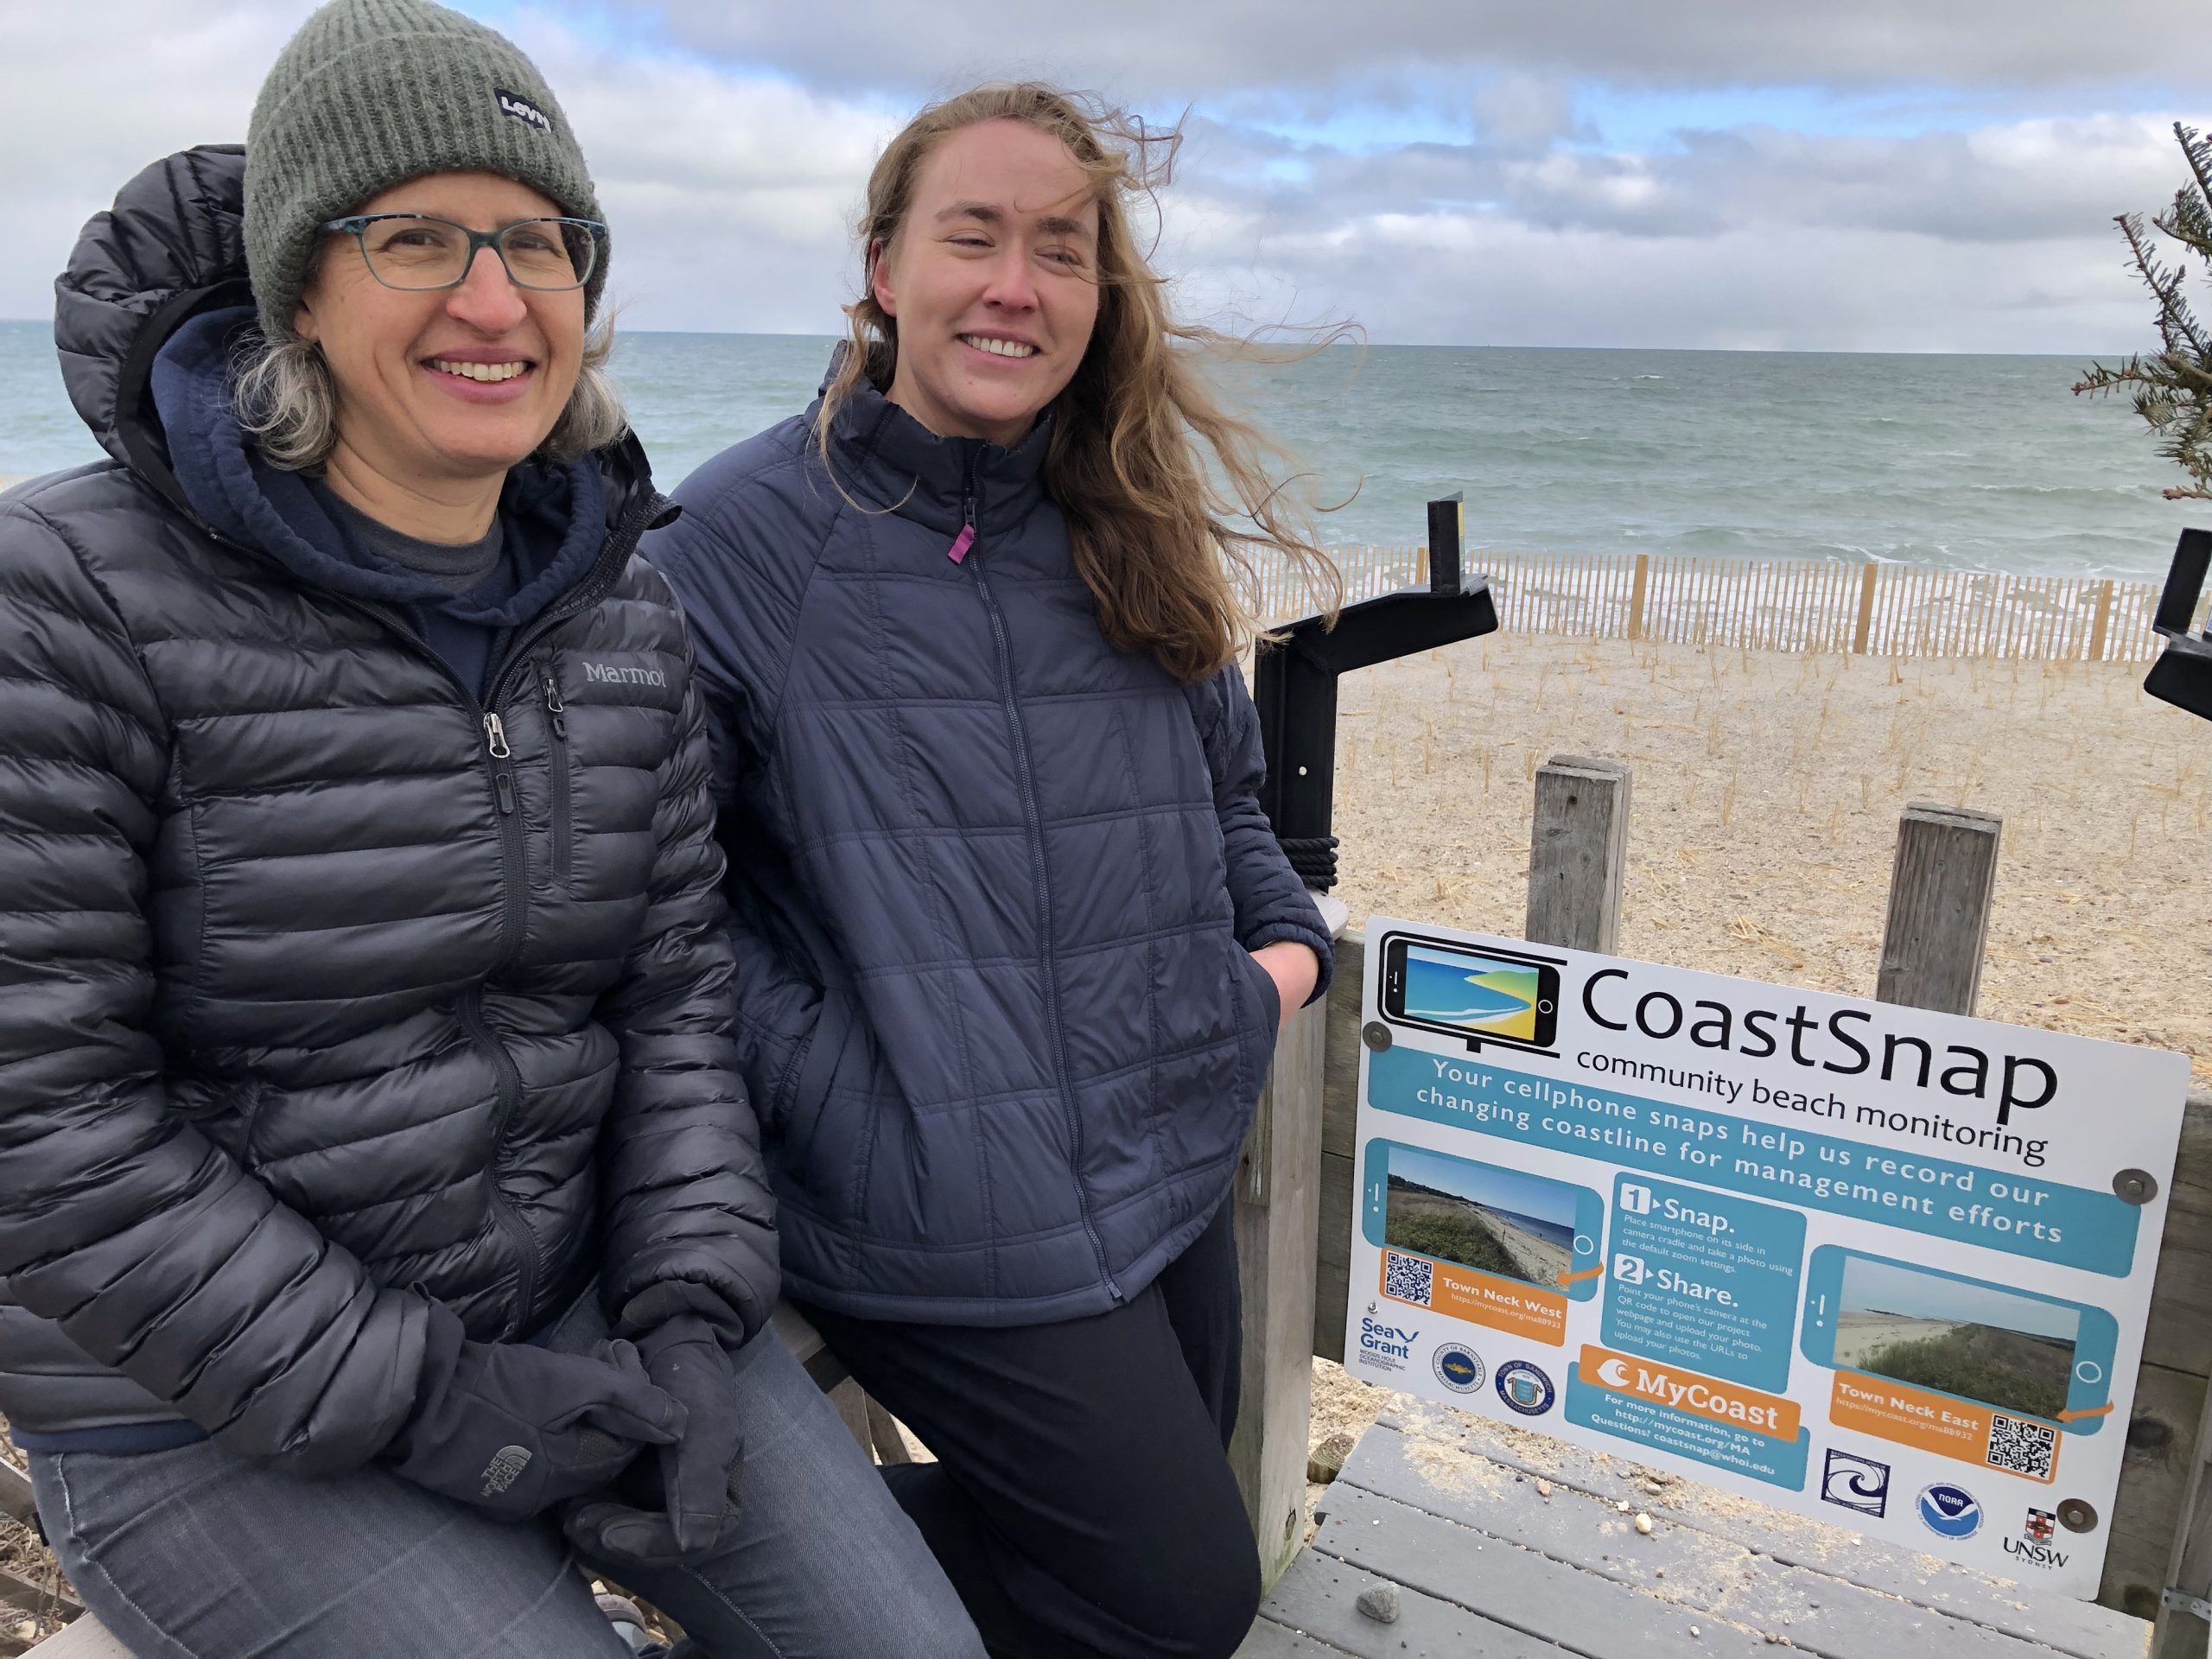 WHOI scientist Sarah Das, left, and graduate student Rilee Thomas at the Town Neck Beach CoastSnap station in Sandwich, MA.